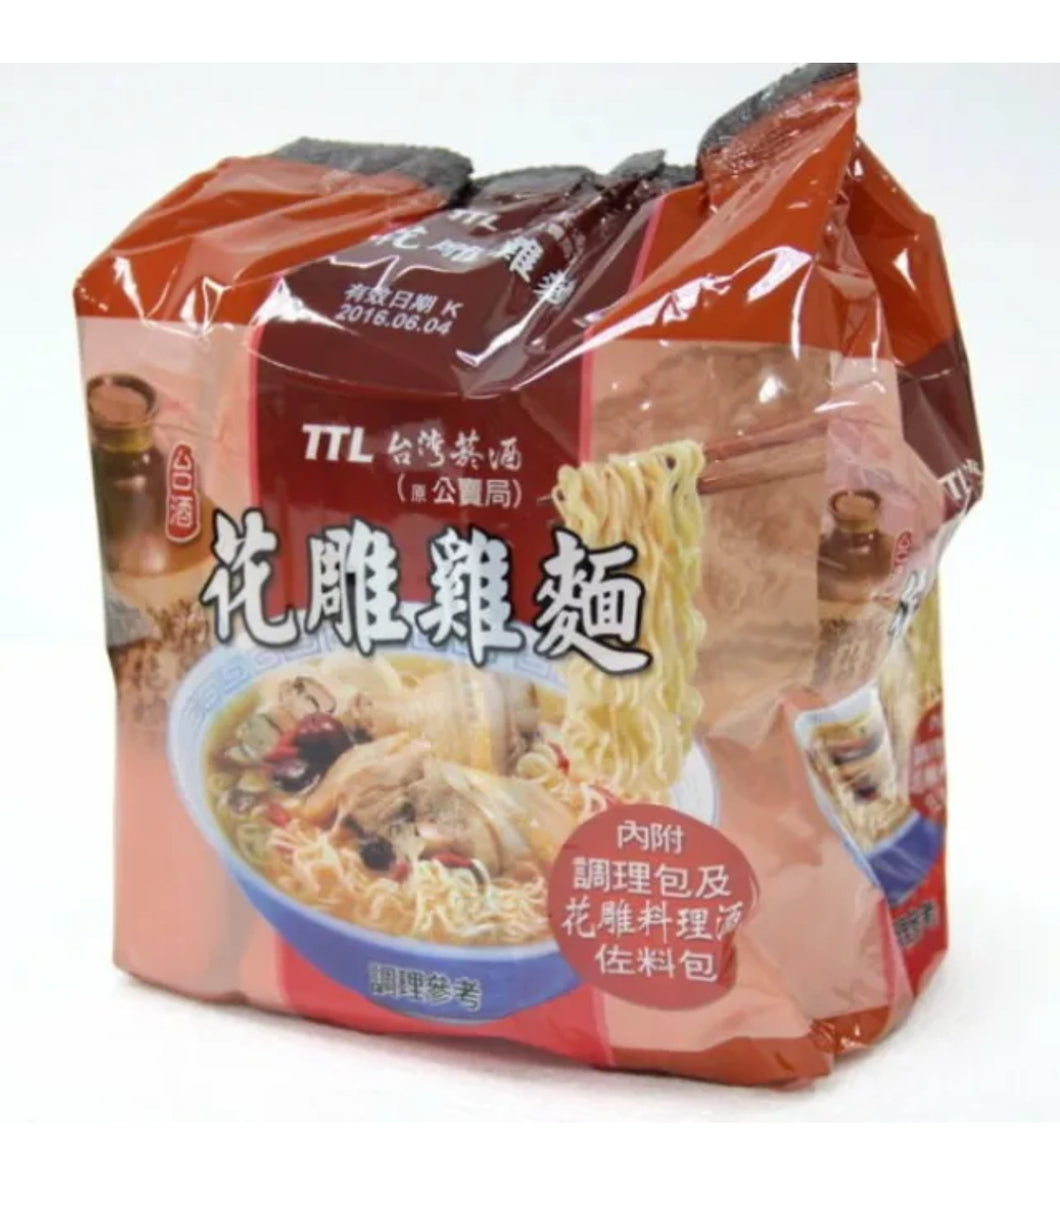 Taiwan TTL 台酒花雕雞麵 Hua Diao Chicken Soup Flavor Instant Noodle 3Pack (200g)